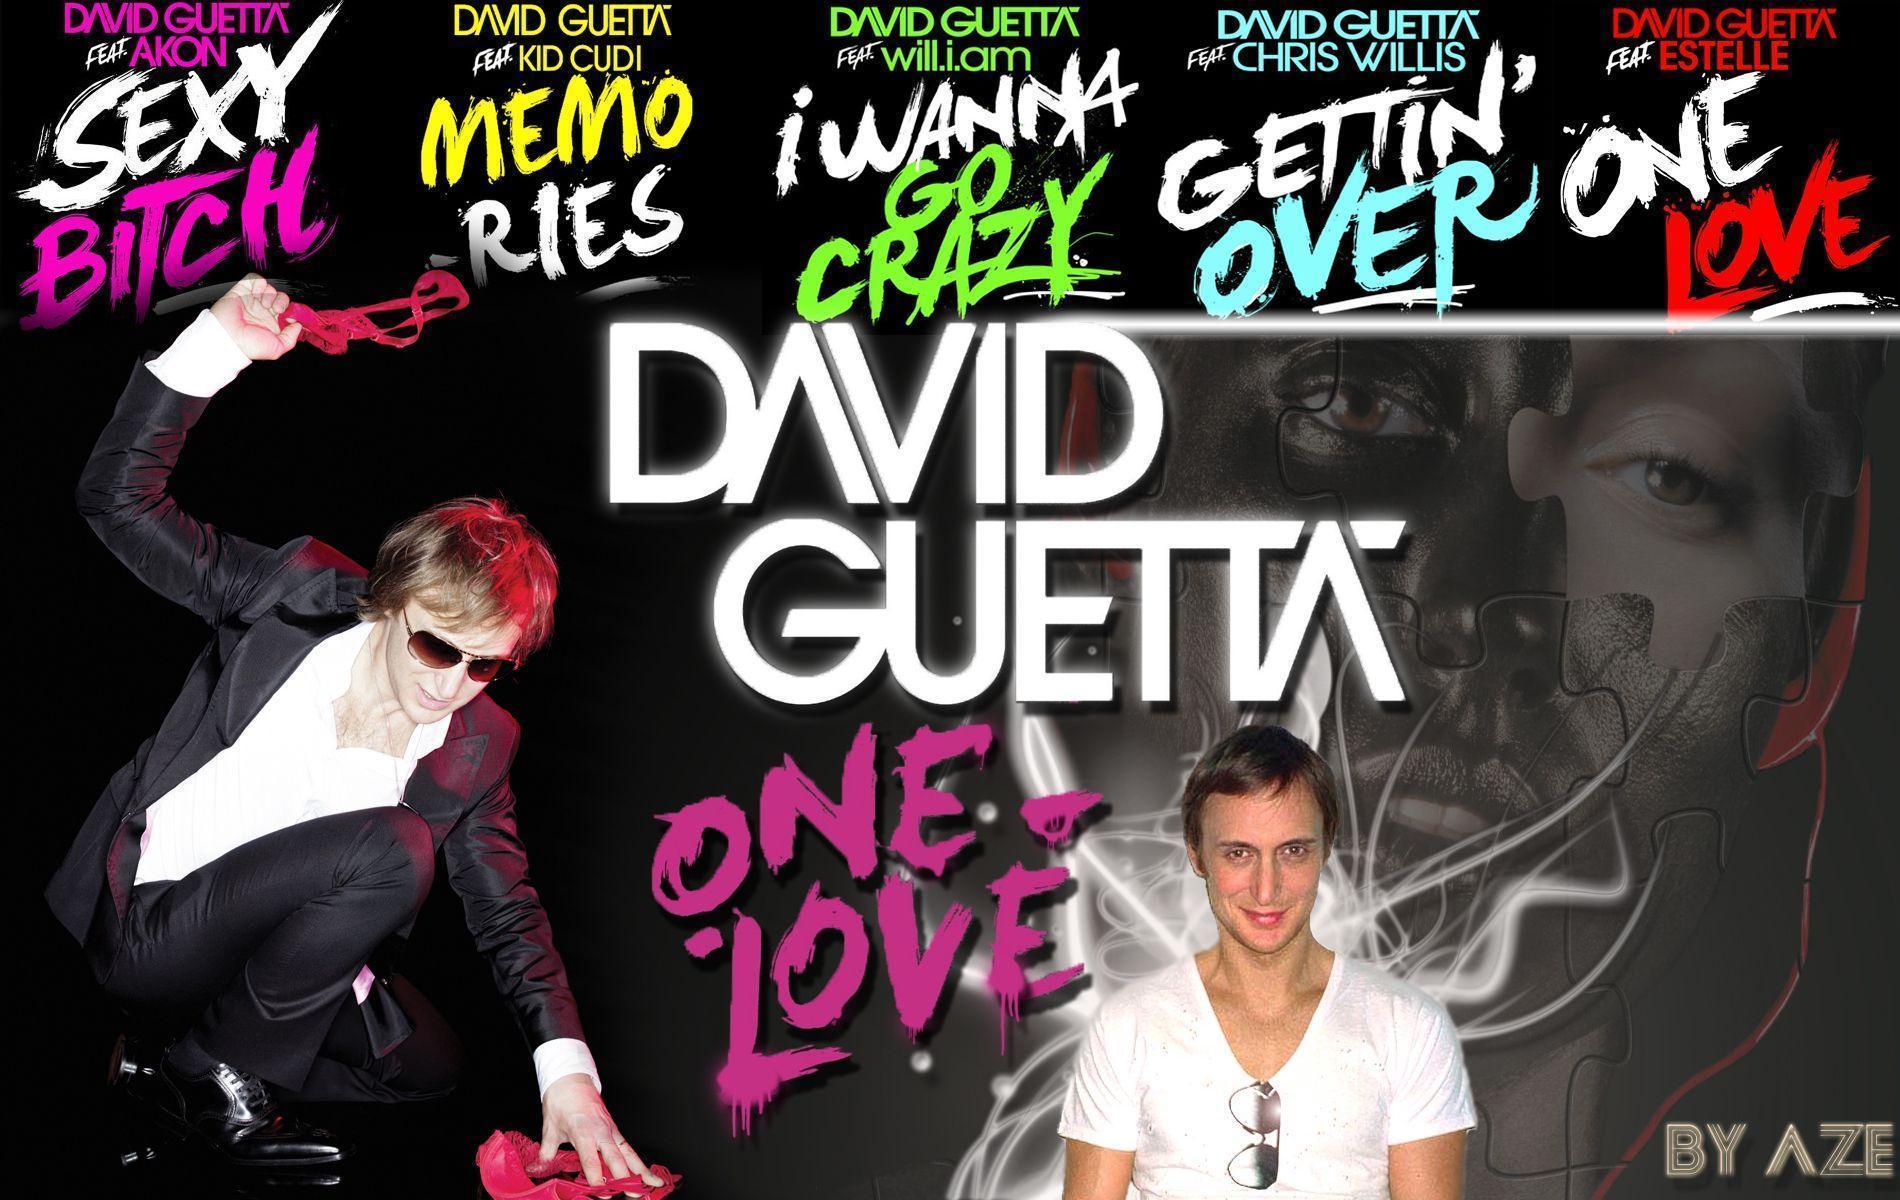 David Guetta on background printing wallpaper and image